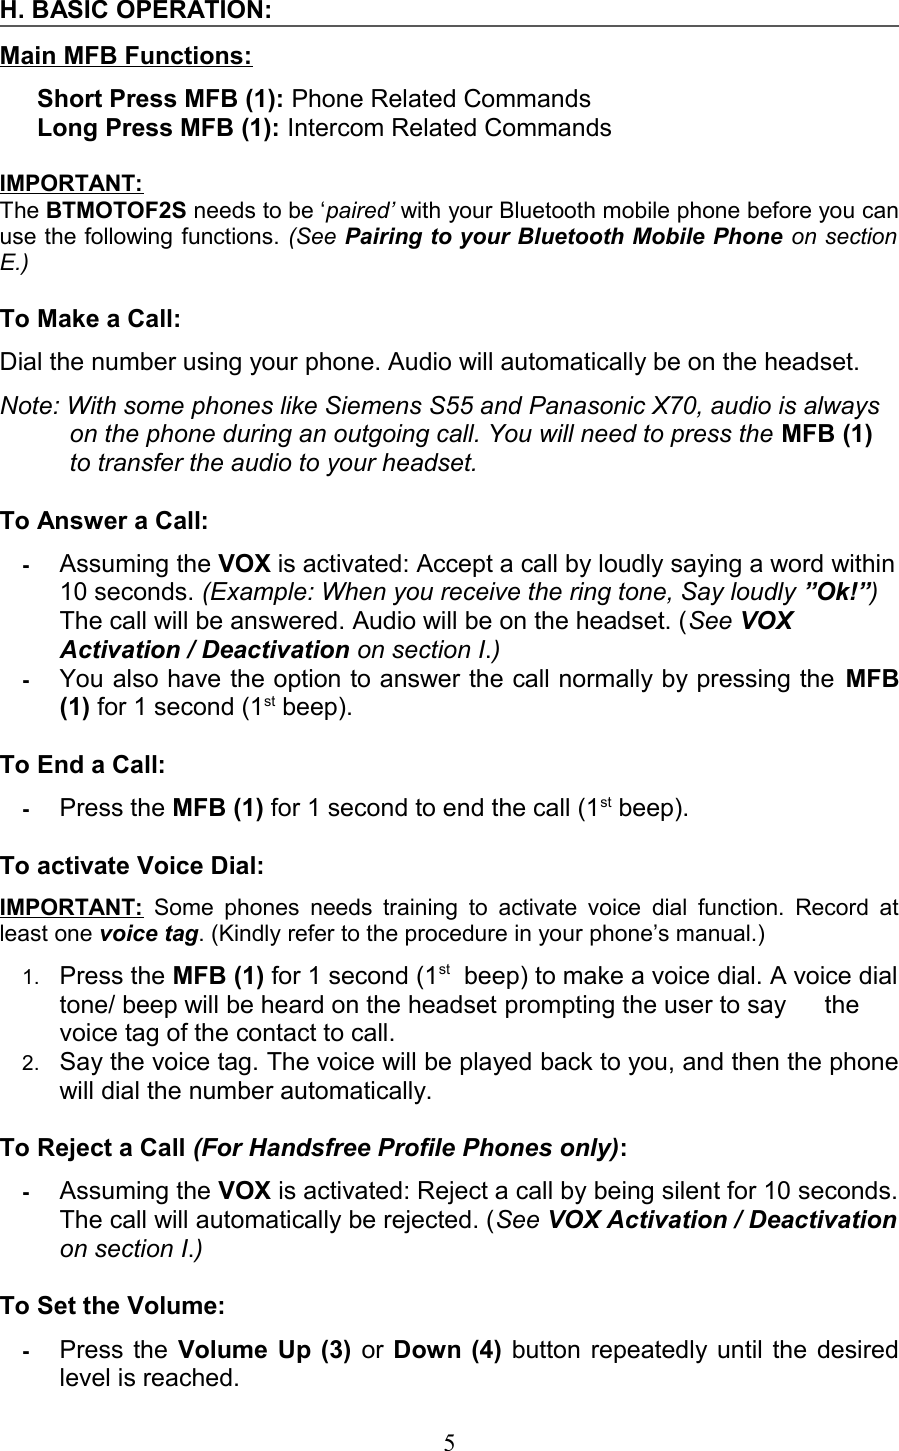 H. BASIC OPERATION:Main MFB Functions:Short Press MFB (1): Phone Related CommandsLong Press MFB (1): Intercom Related CommandsIMPORTANT:The BTMOTOF2S needs to be ‘paired’ with your Bluetooth mobile phone before you can use the following functions. (See Pairing to your Bluetooth Mobile Phone on section  E.)To Make a Call: Dial the number using your phone. Audio will automatically be on the headset.Note: With some phones like Siemens S55 and Panasonic X70, audio is always  on the phone during an outgoing call. You will need to press the MFB (1) to transfer the audio to your headset.To Answer a Call: -Assuming the VOX is activated: Accept a call by loudly saying a word within 10 seconds. (Example: When you receive the ring tone, Say loudly ”Ok!”) The call will be answered. Audio will be on the headset. (See VOX Activation / Deactivation on section I.)-You also have the option to answer the call normally by pressing the MFB (1) for 1 second (1st beep). To End a Call: -Press the MFB (1) for 1 second to end the call (1st beep).To activate Voice Dial: IMPORTANT:  Some phones needs training to activate voice dial function. Record at least one voice tag. (Kindly refer to the procedure in your phone’s manual.) 1. Press the MFB (1) for 1 second (1st  beep) to make a voice dial. A voice dial tone/ beep will be heard on the headset prompting the user to say  the voice tag of the contact to call.2. Say the voice tag. The voice will be played back to you, and then the phone will dial the number automatically.To Reject a Call (For Handsfree Profile Phones only): -Assuming the VOX is activated: Reject a call by being silent for 10 seconds. The call will automatically be rejected. (See VOX Activation / Deactivation  on section I.)To Set the Volume:   -Press the Volume Up (3) or  Down (4) button repeatedly until the desired level is reached.5